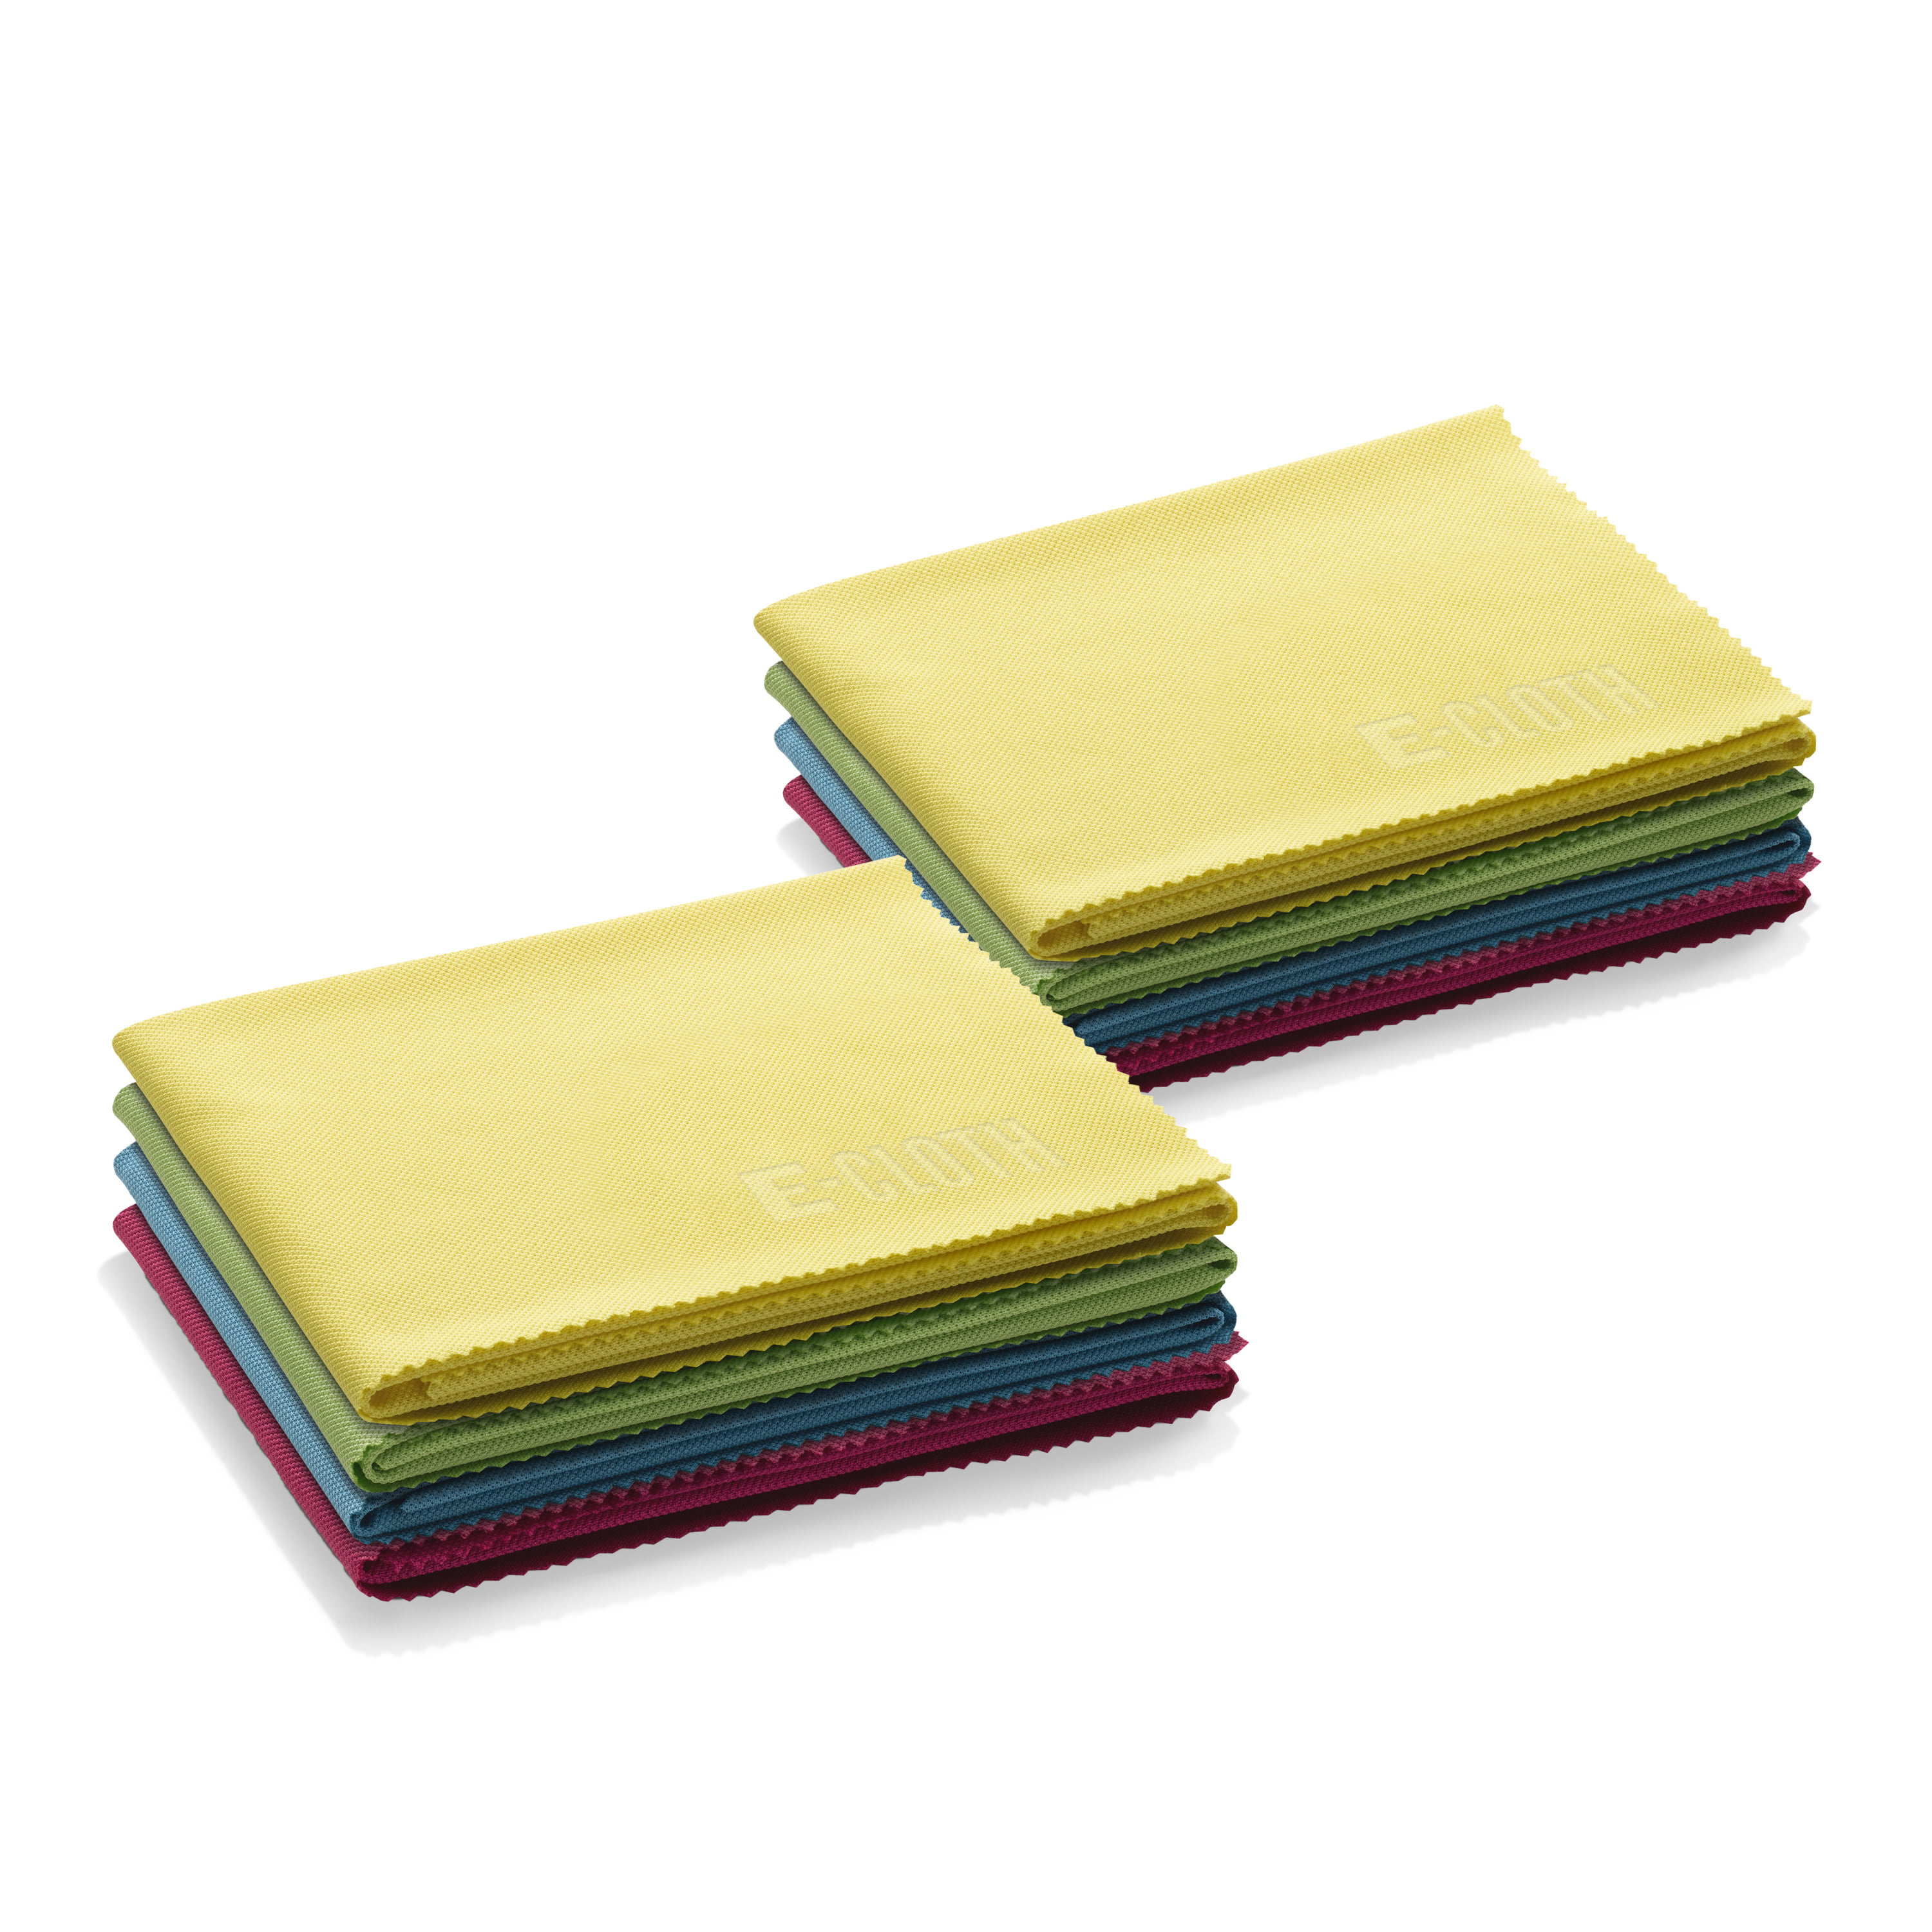 E-Cloth GLASS & POLISHING Cleaning Cloth CLEANS W/ WATER REUSABLE! 3 pack! 